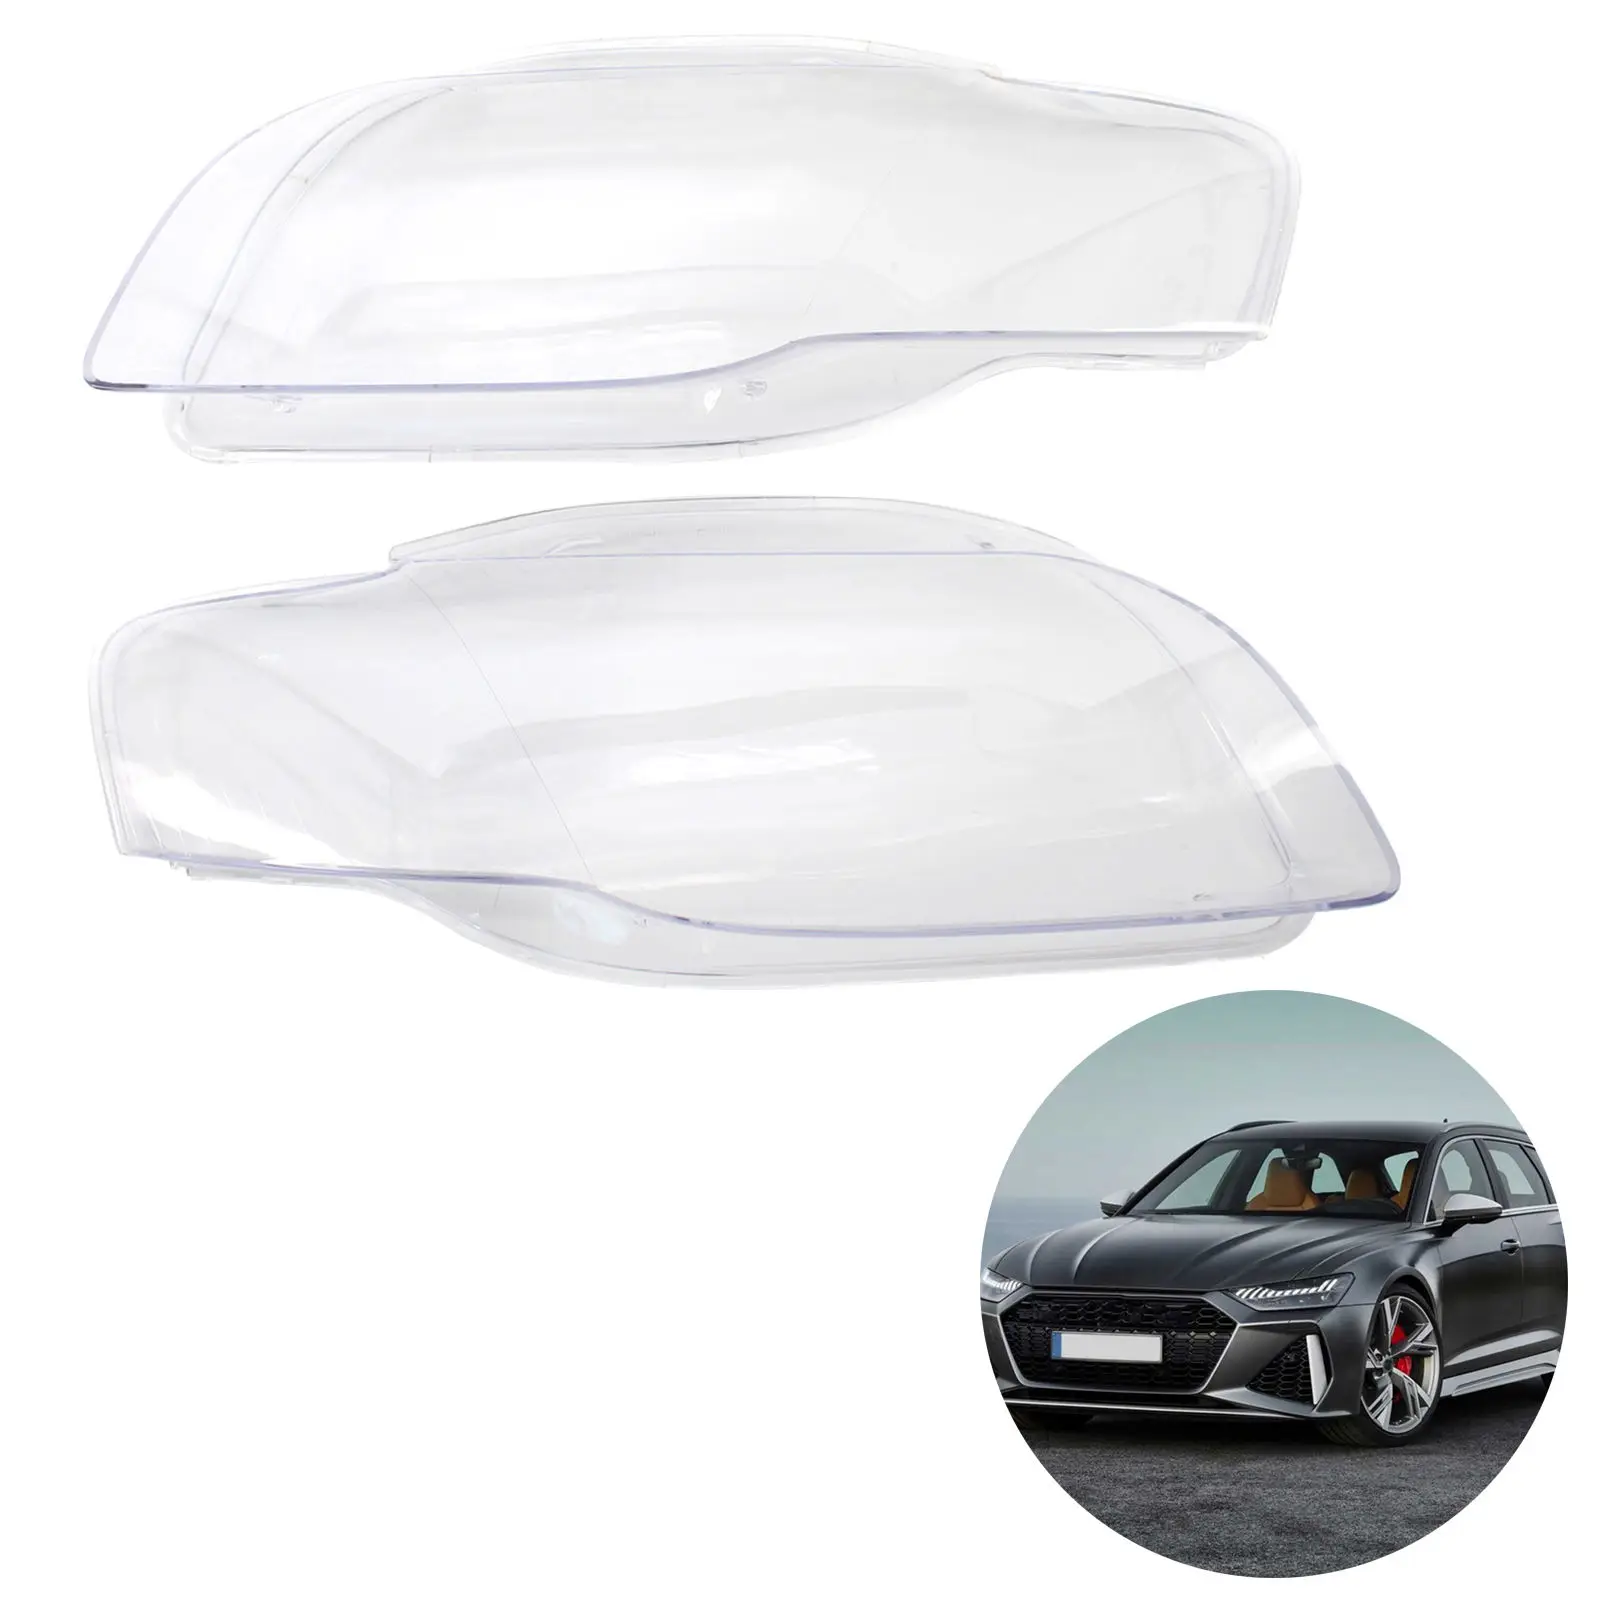 Lens Cover 1 Pair Dustproof Headlight Lampshade Fits for Audi A4 B7 S4 2005-2008 8E0941003 8E0941004